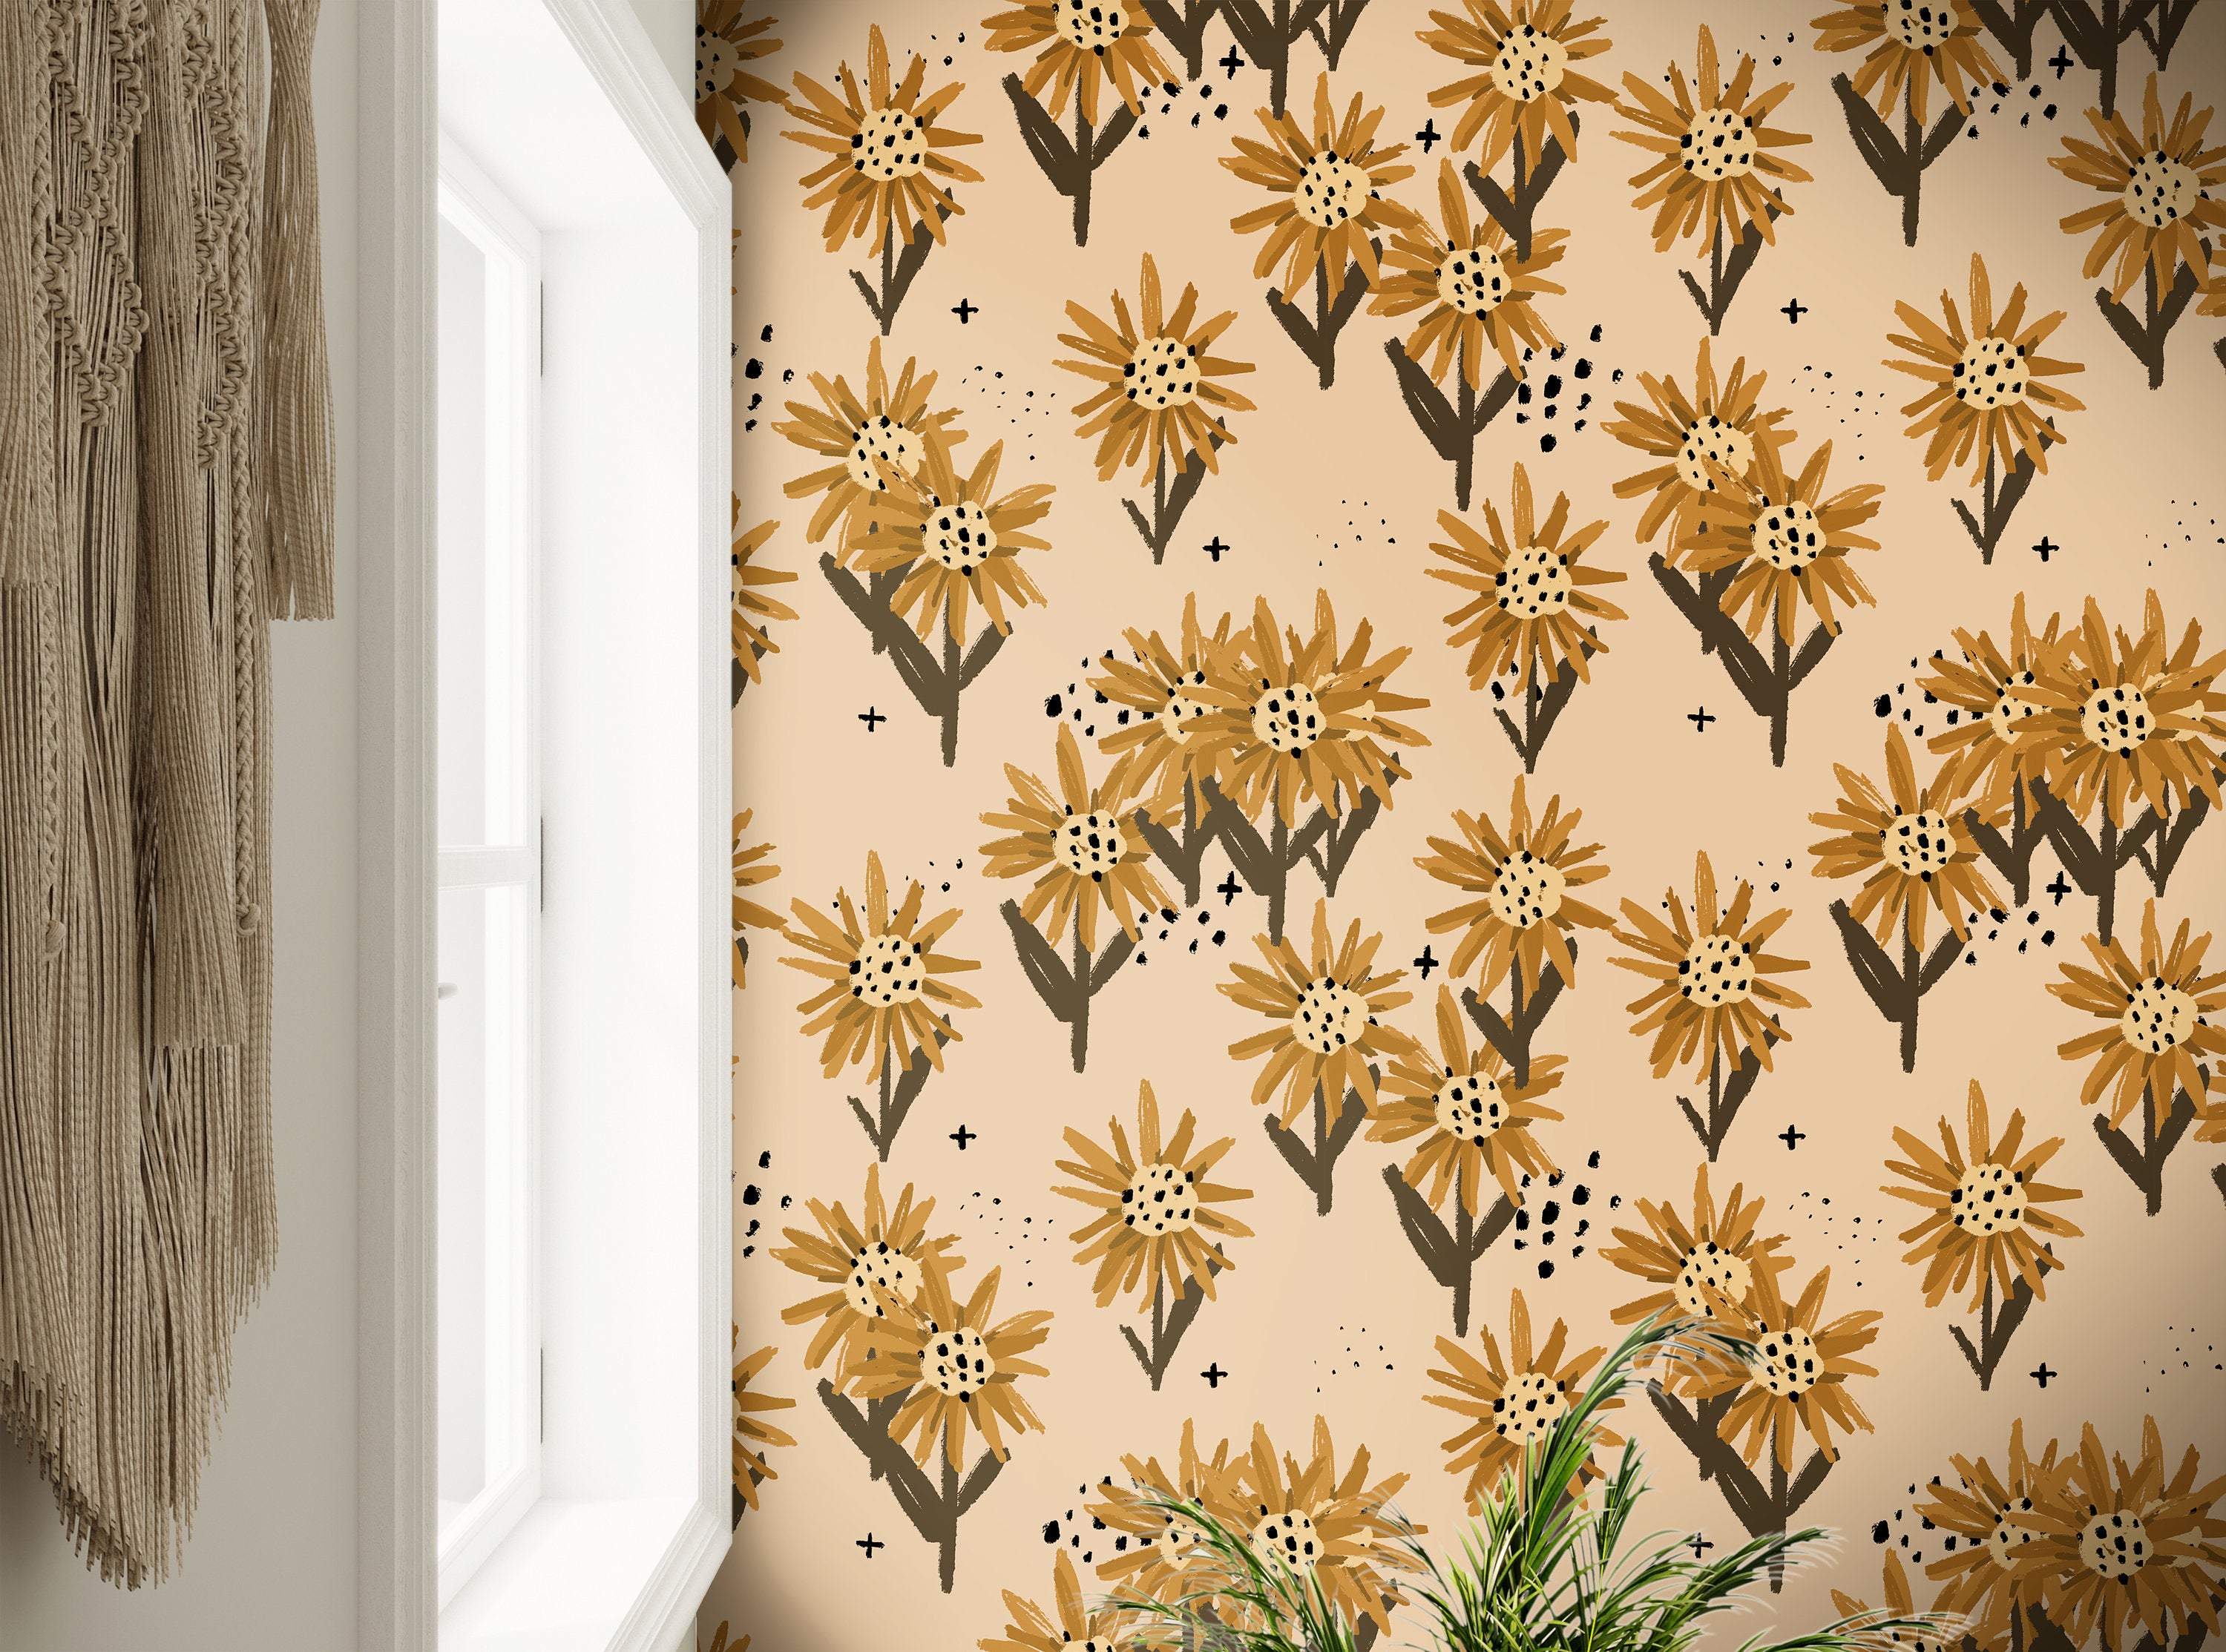 Wallpaper Peel and Stick Wallpaper Golden Painted Sunflowers Floral Removable Wallpaper Wall Decor Home Decor Wall Art Room Decor 3775 - JamesAndColors